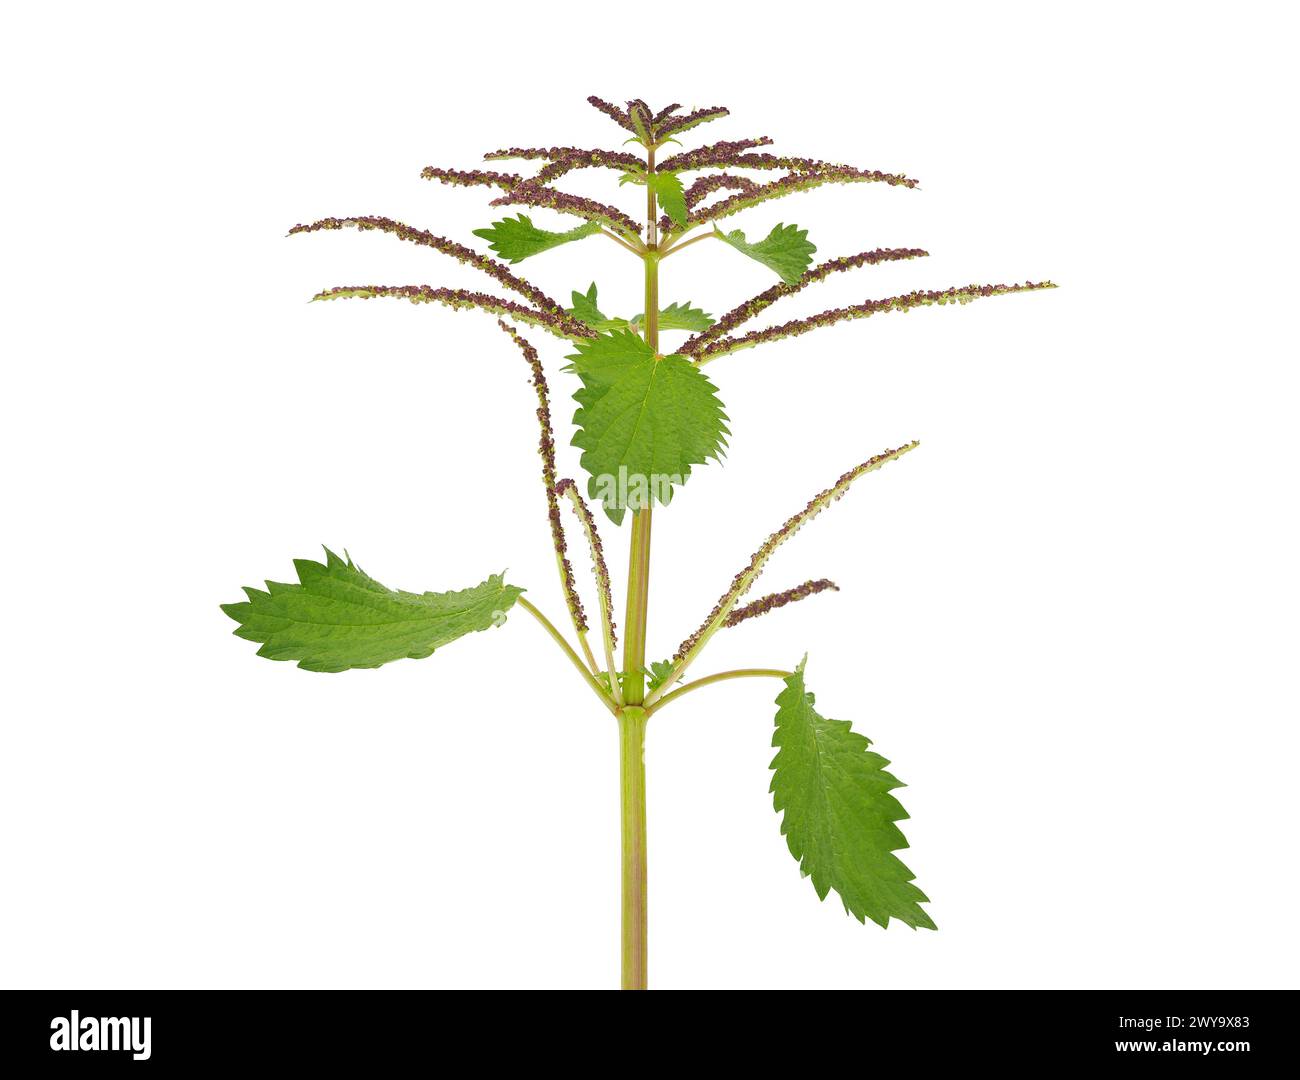 Membranous nettle plant isolated on white background, Urtica membranacea Stock Photo